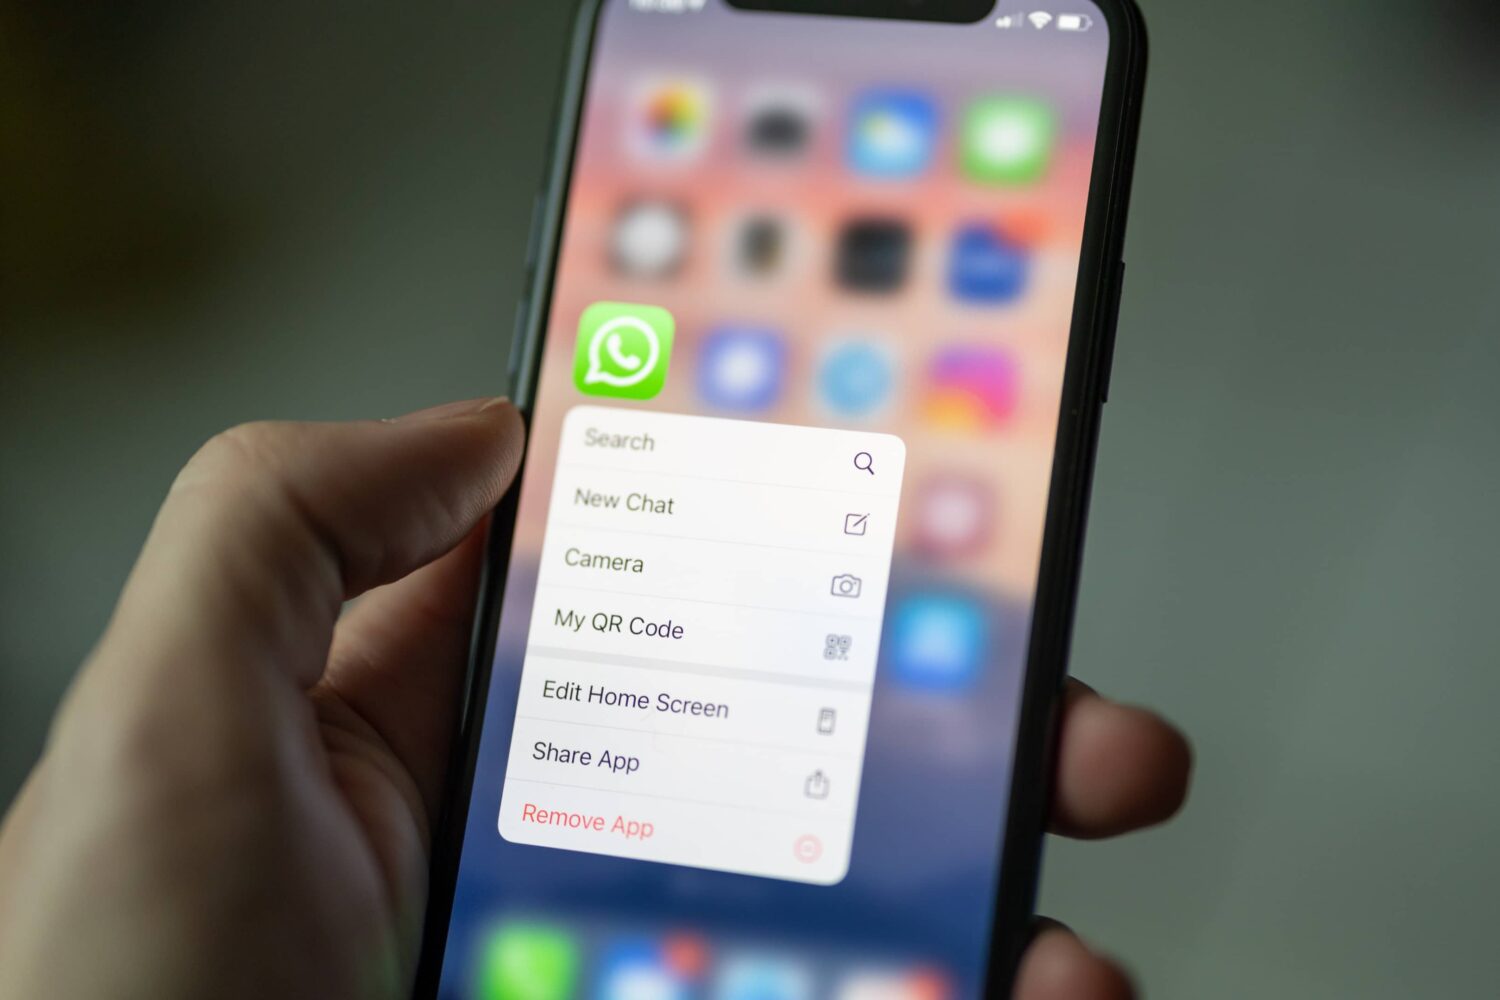 Apple's iPhone displaying the home screen shortcuts menu for WhatsApp is being held in a male's hand in this featured image from Unsplash